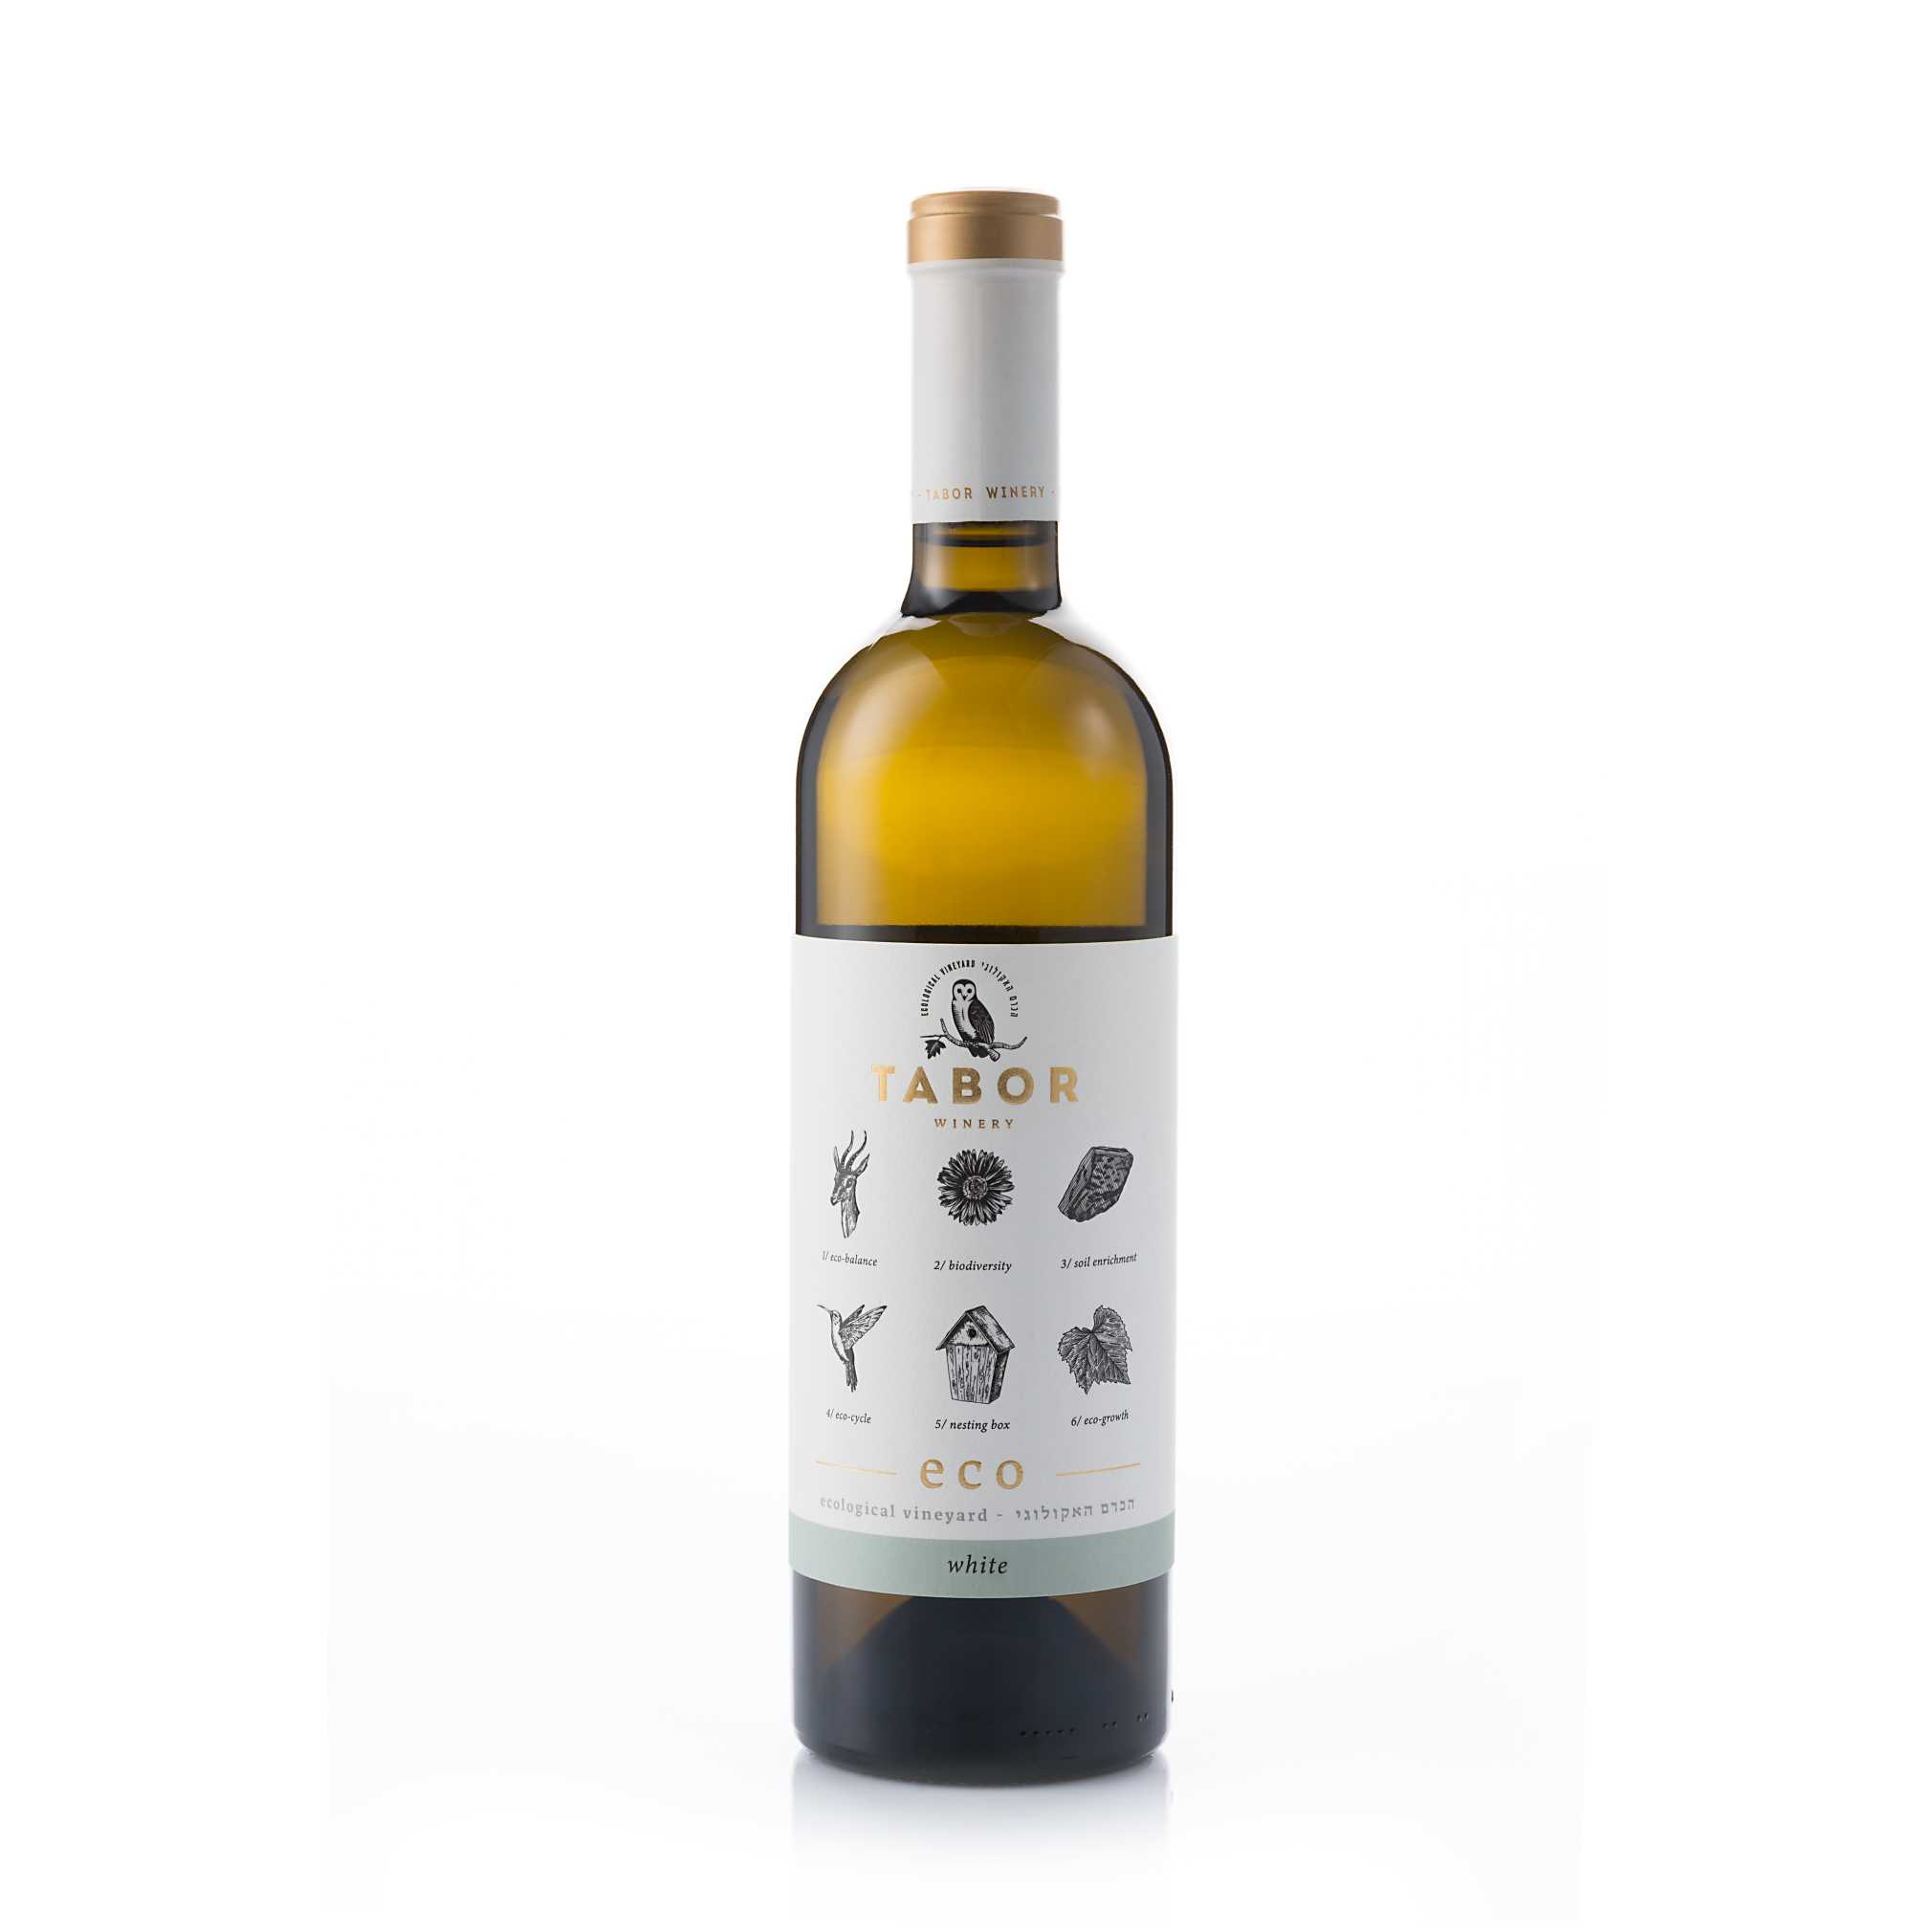 Tabor Eco White - A Kosher Wine From Israel